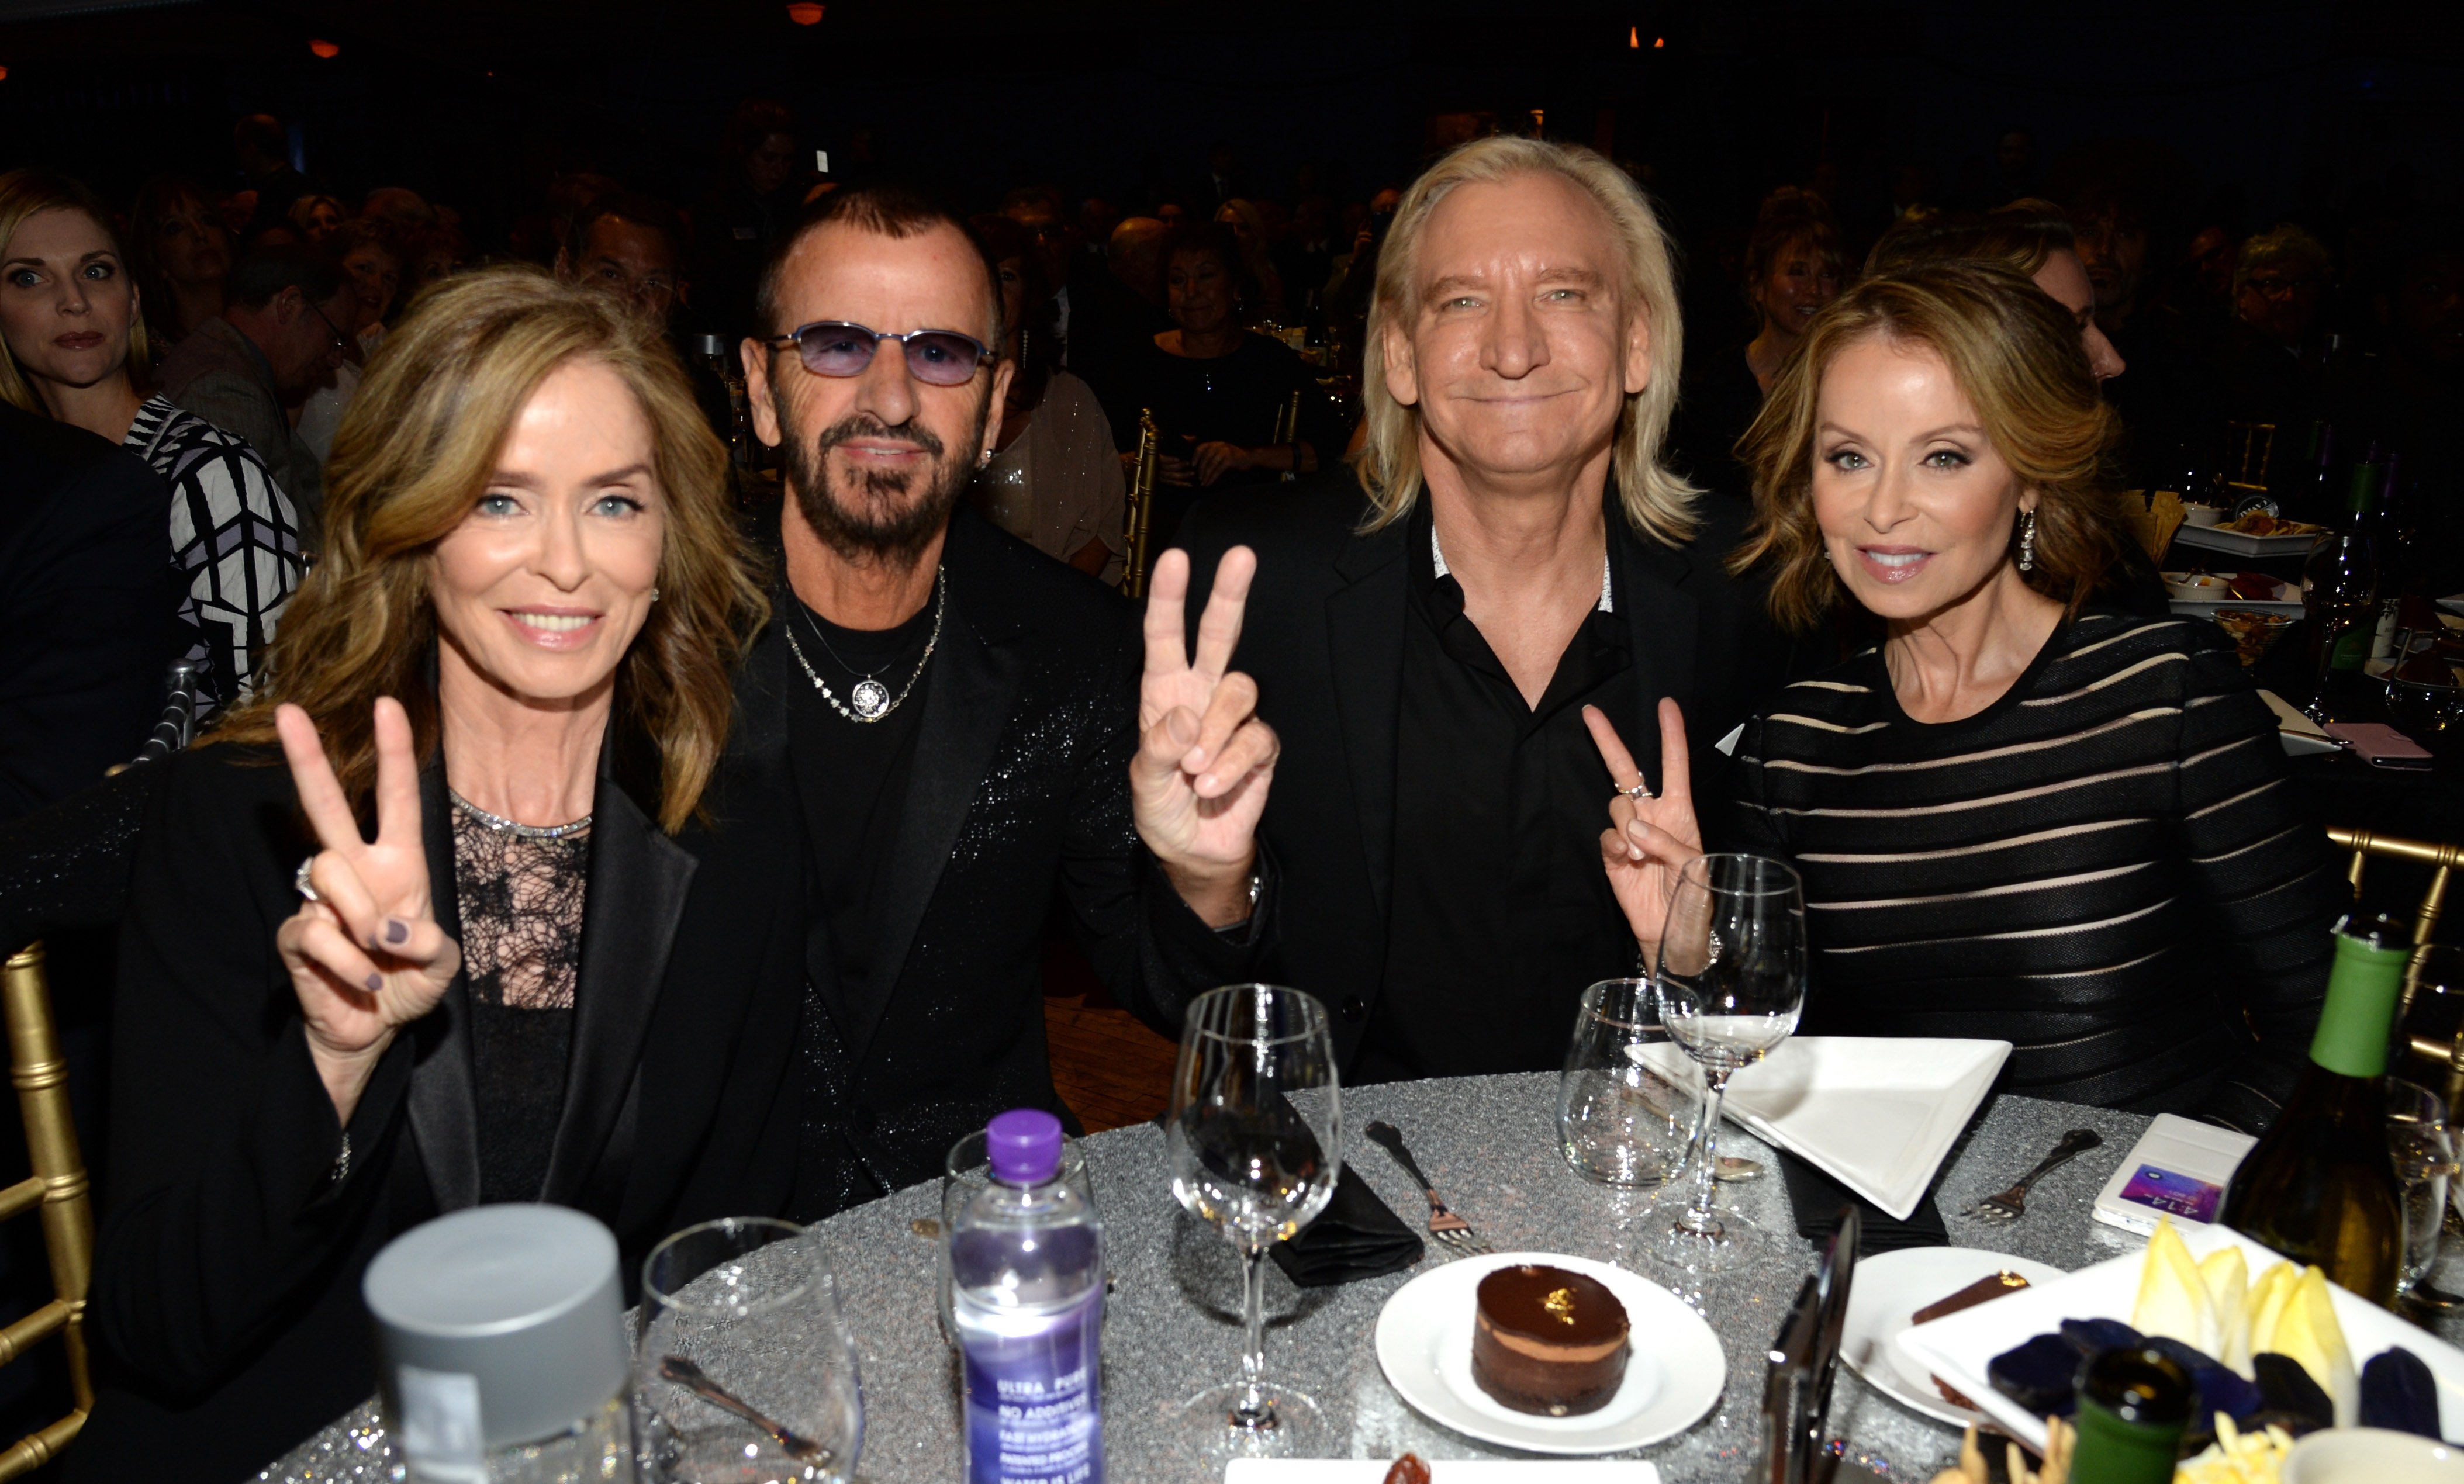 Barbara Bach, Ringo Starr, Joe Walsh, and Marjorie Bach are seated at a table at the 2015 Hall of Fame Induction Ceremony. The group offered peace signs as they posed for a photo.